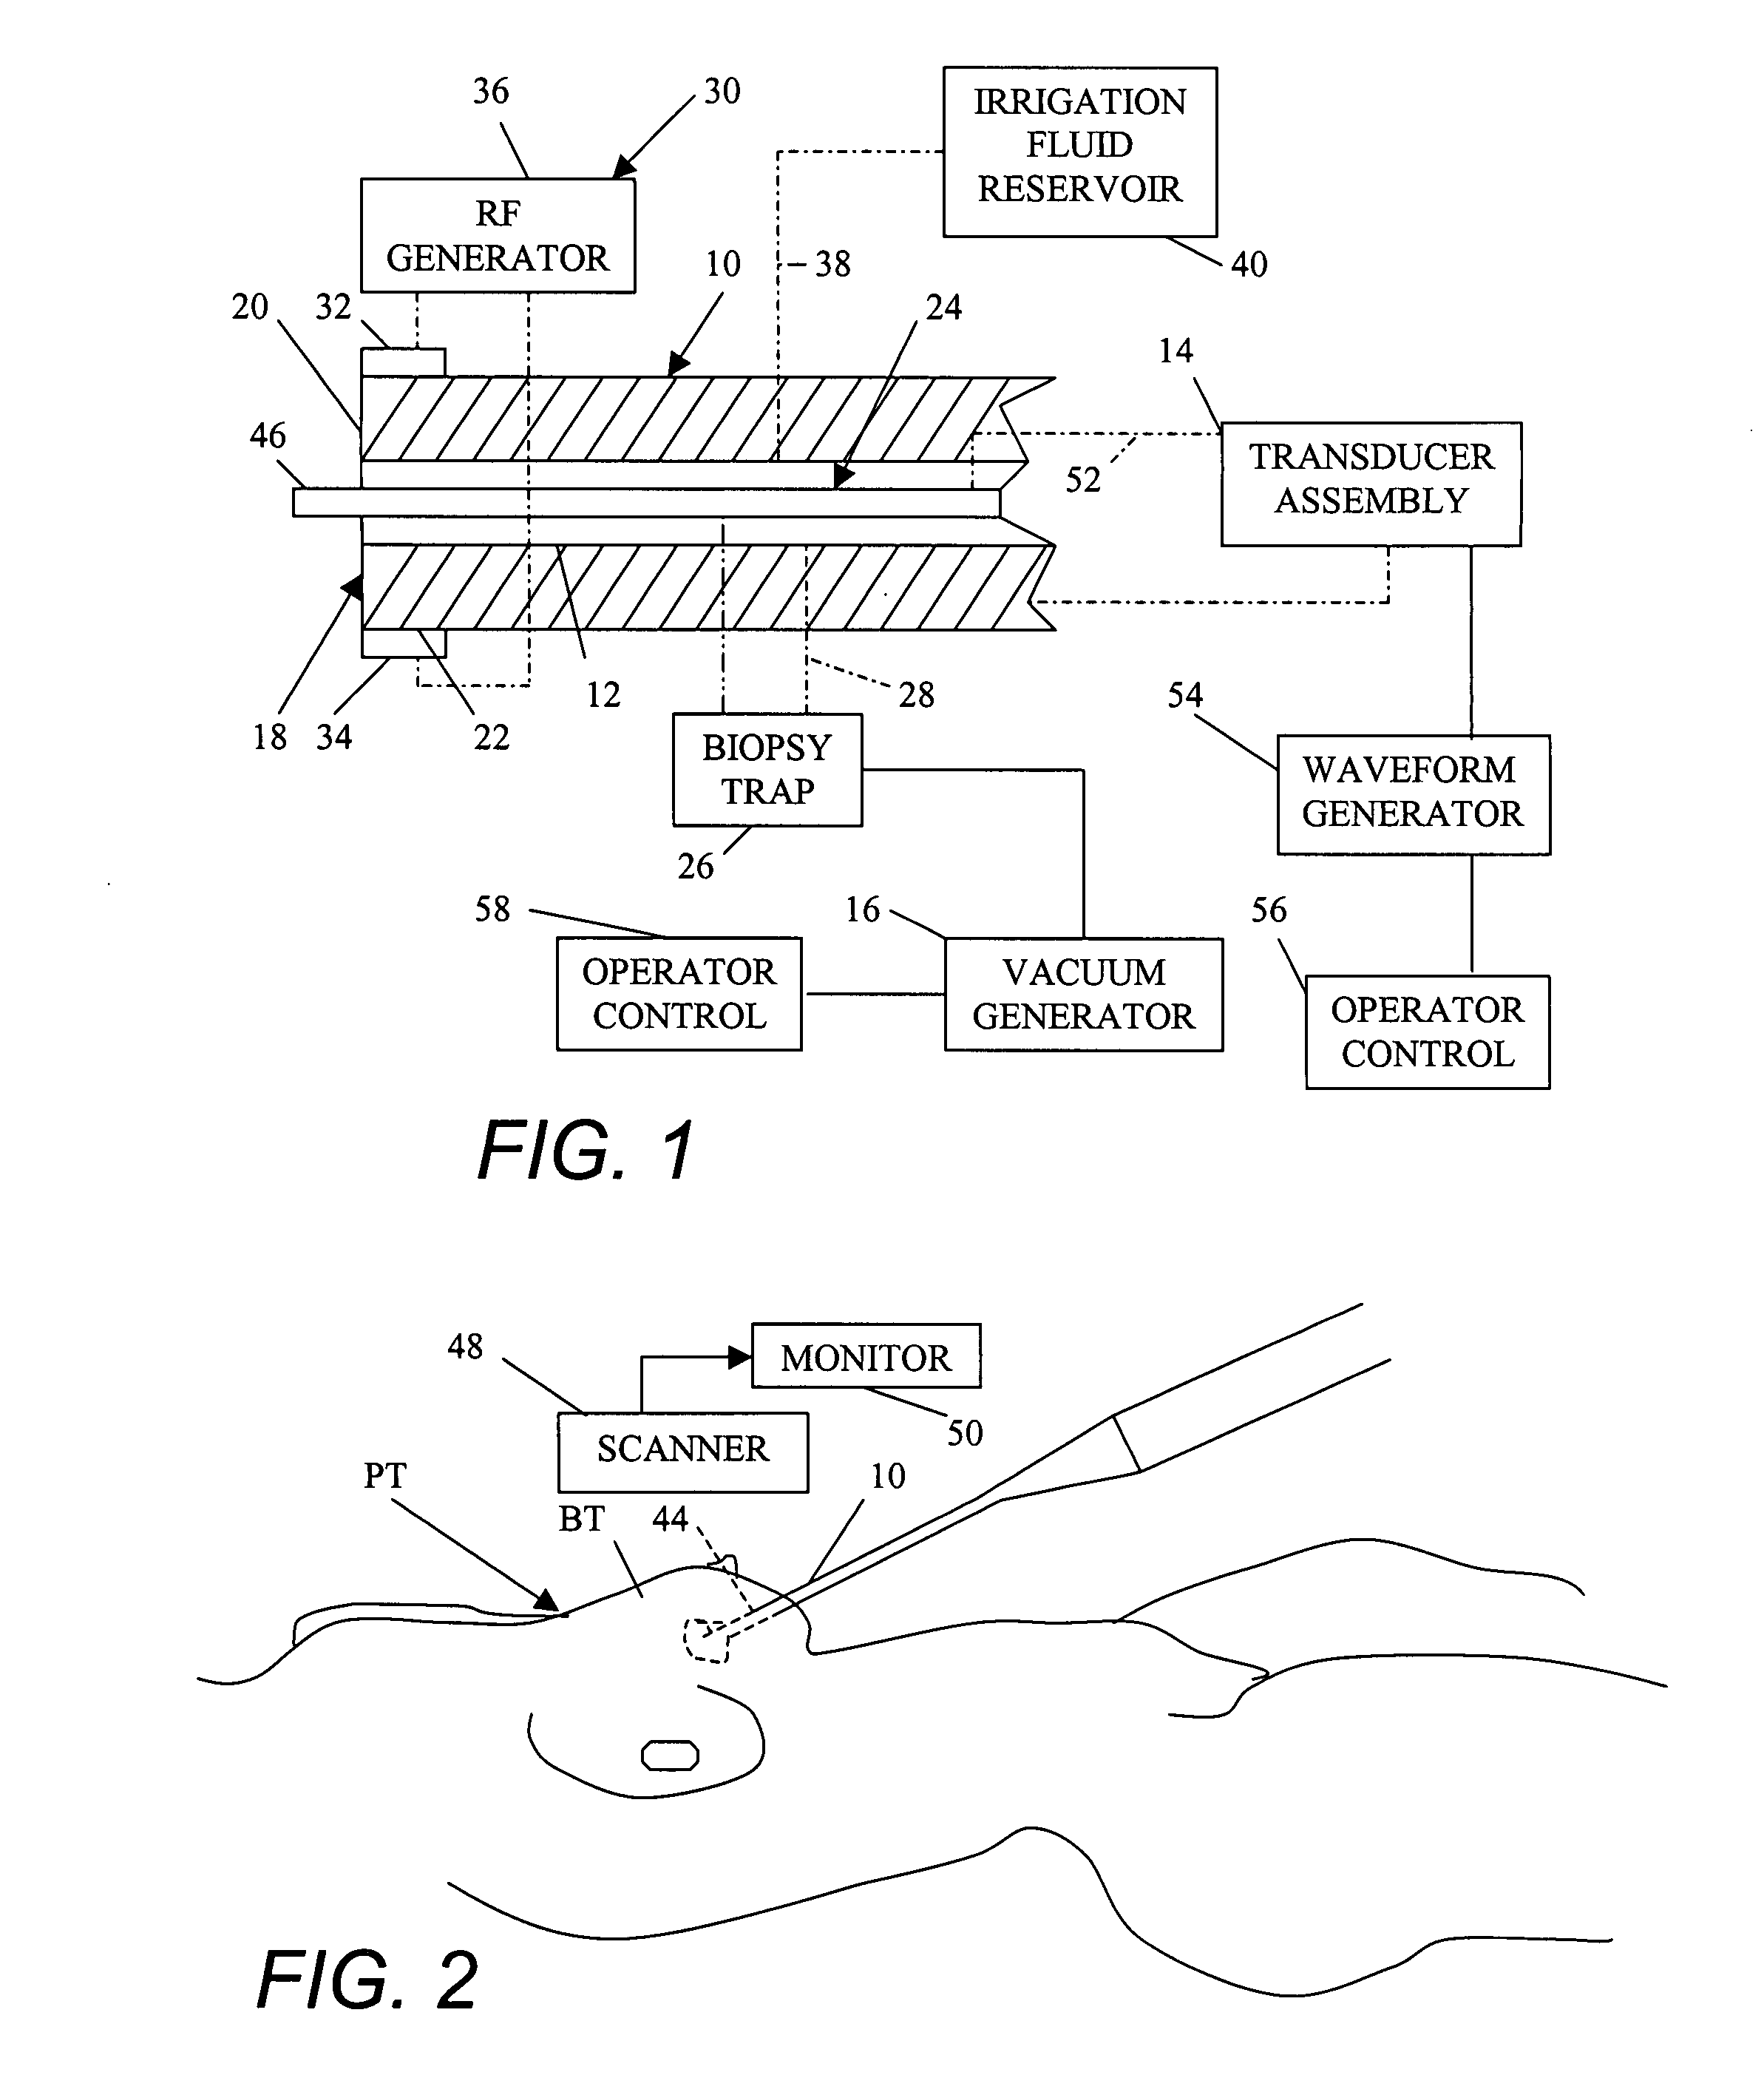 Treatment of breast disease with vibrating device